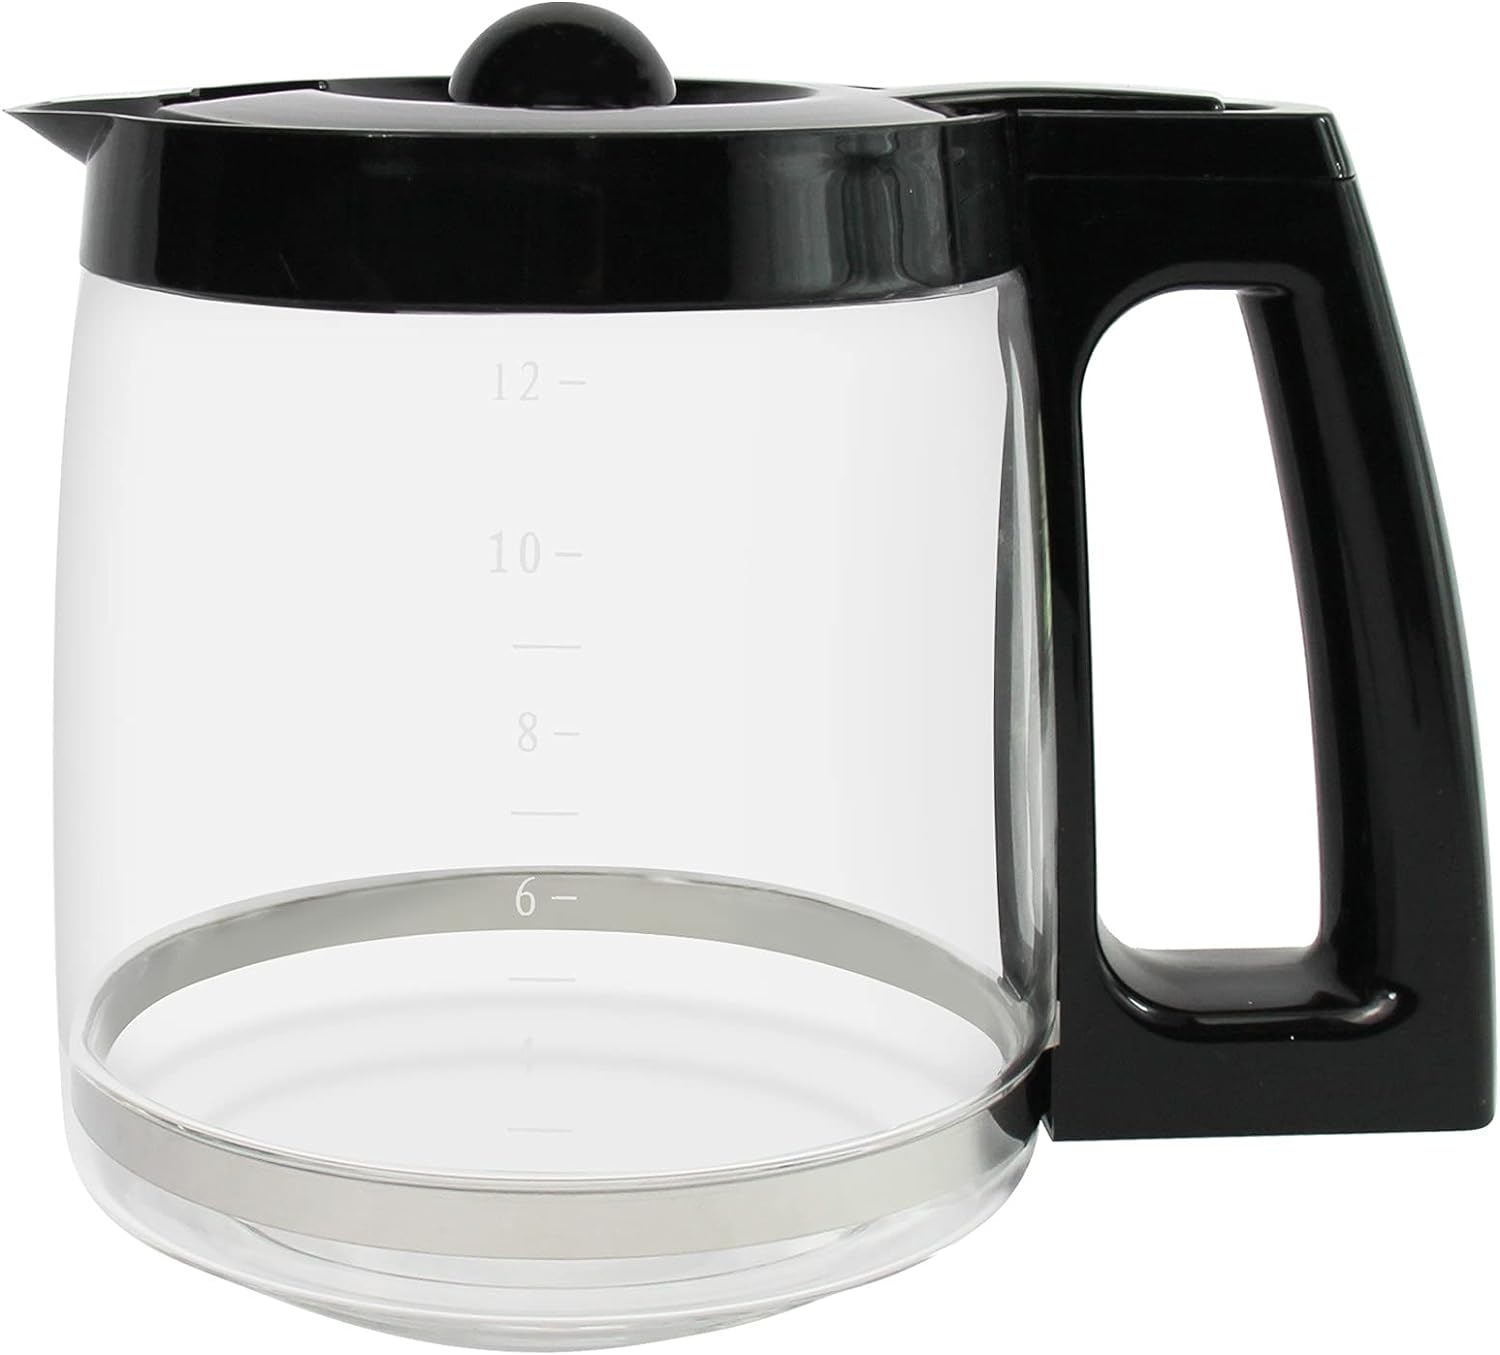 Ulrempart 12-Cup Replacement Coffee Carafe Pot | Compatible with Hamilton Coffee Maker, Machine, Brewer | Fit for Models 49980A, 49980Z,